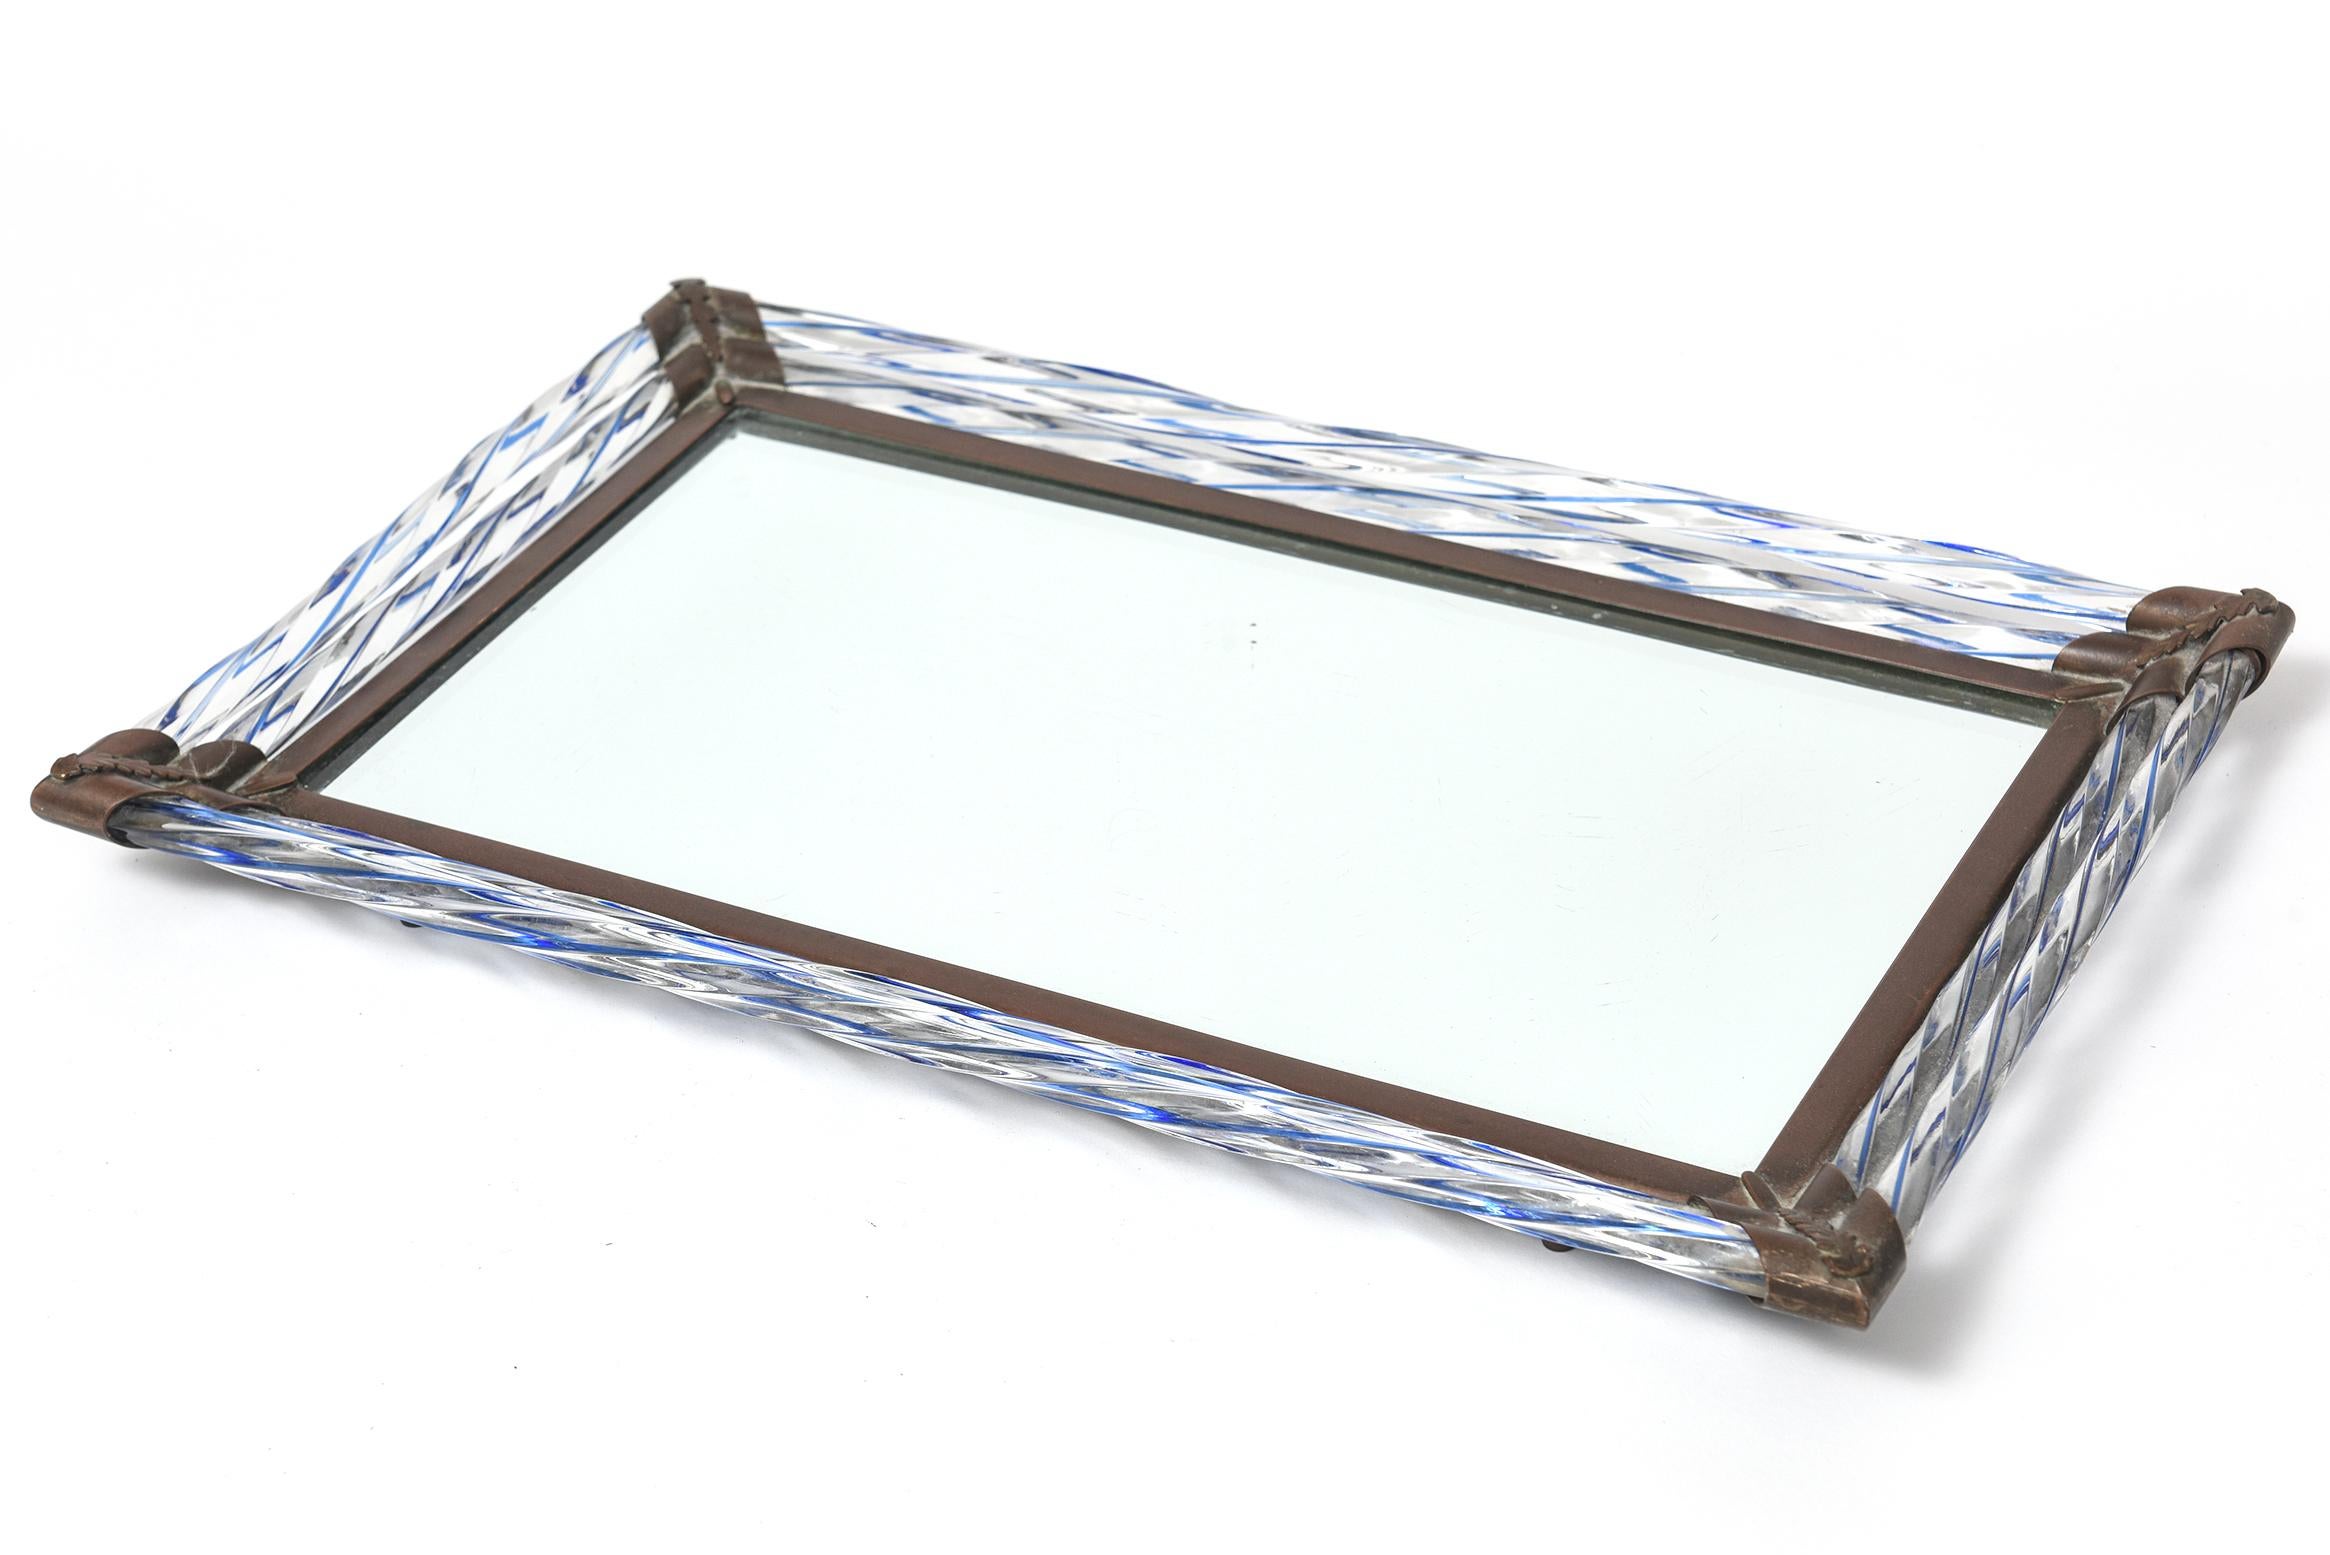 Stunning Venetian mirrored tray from the 1930's era used by the previous owner to display perfumes, but also perfect as a serving piece, to hold liquor or other decorative objects. It also could be converted to a frame to hold a large family photo.